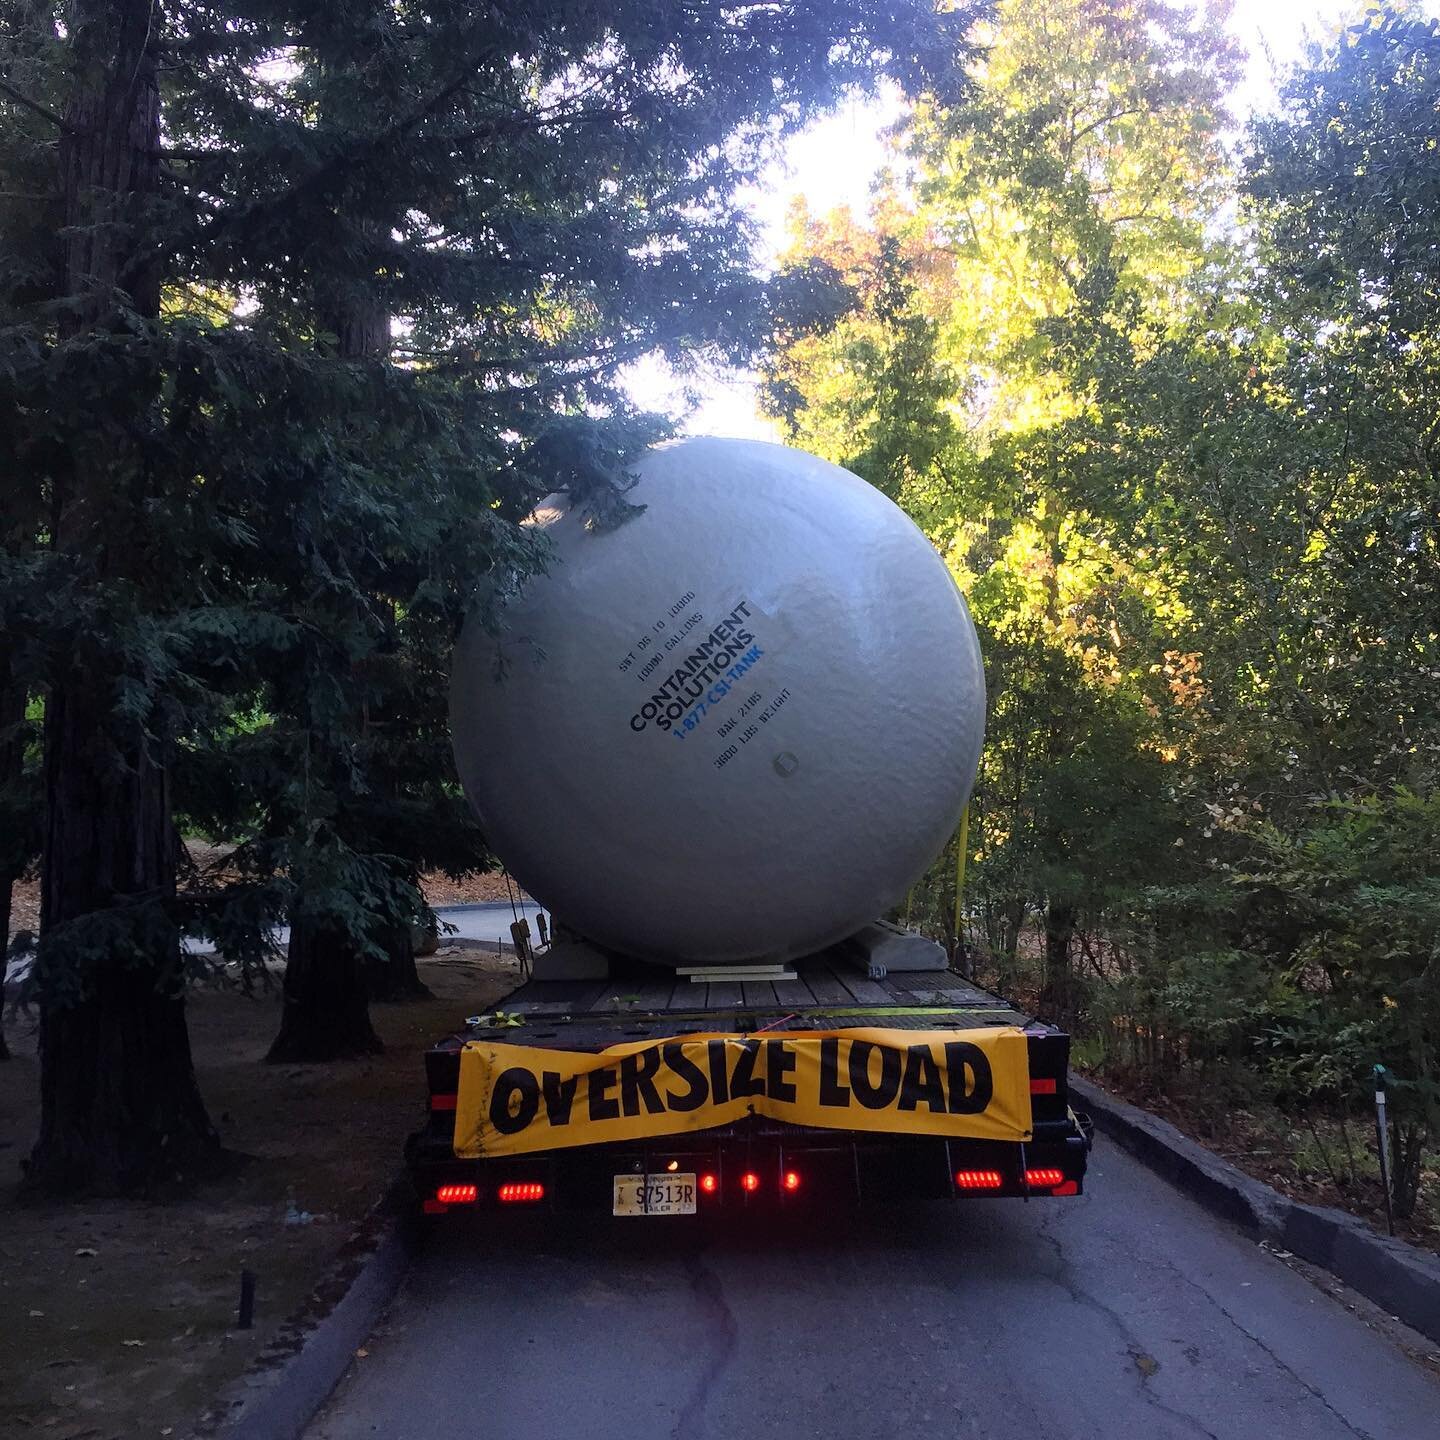 This is just one of three massive 10,000 gallon tanks for rain water retention to irrigate one of our NorCal projects. #30,000gallons #sustainabledesign #leed #irrigation @watersprout_  @buildmarrone